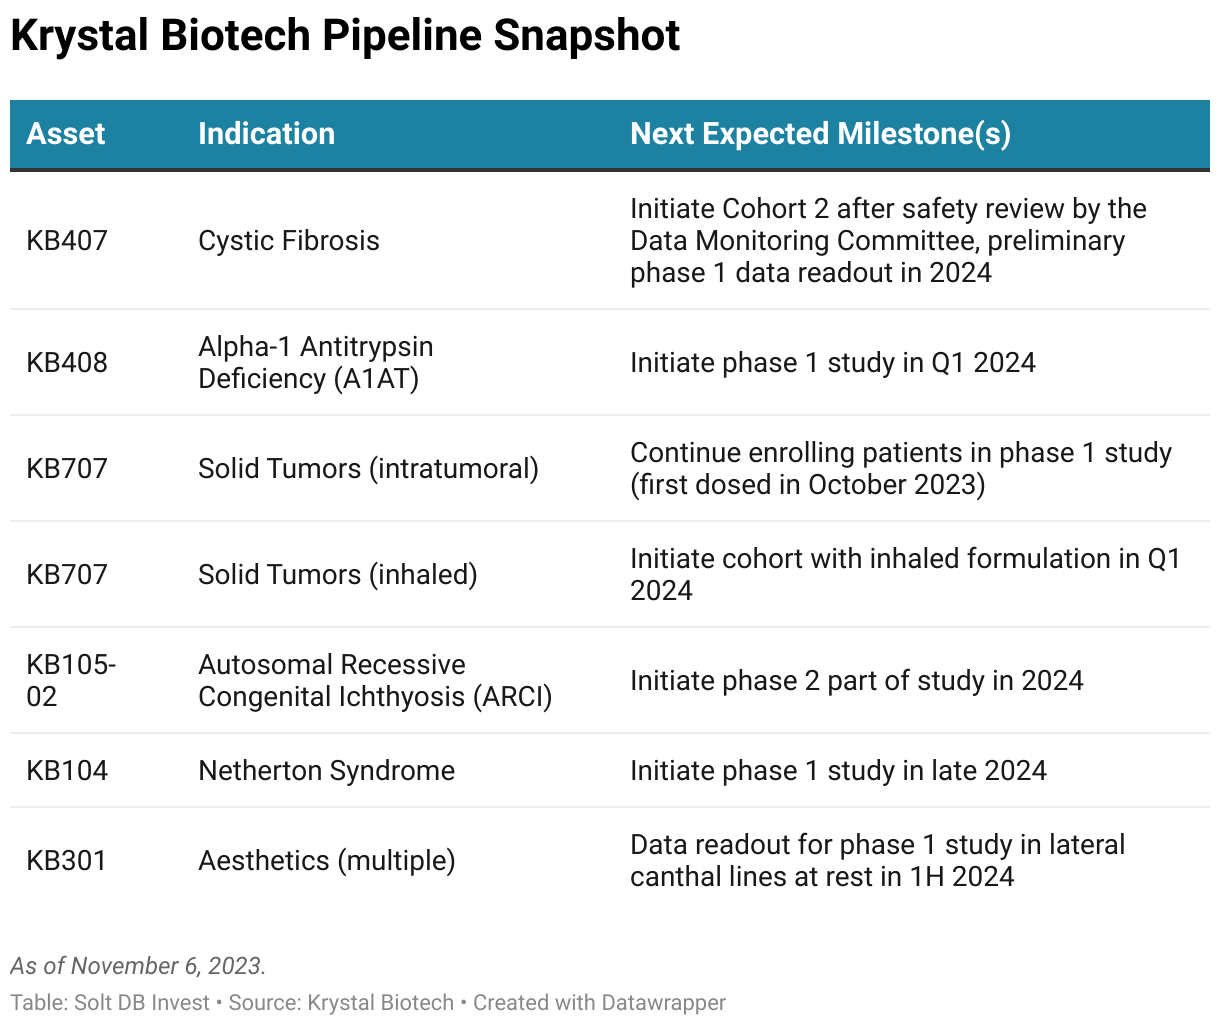 A table showing the drug pipeline of Krystal Biotech.